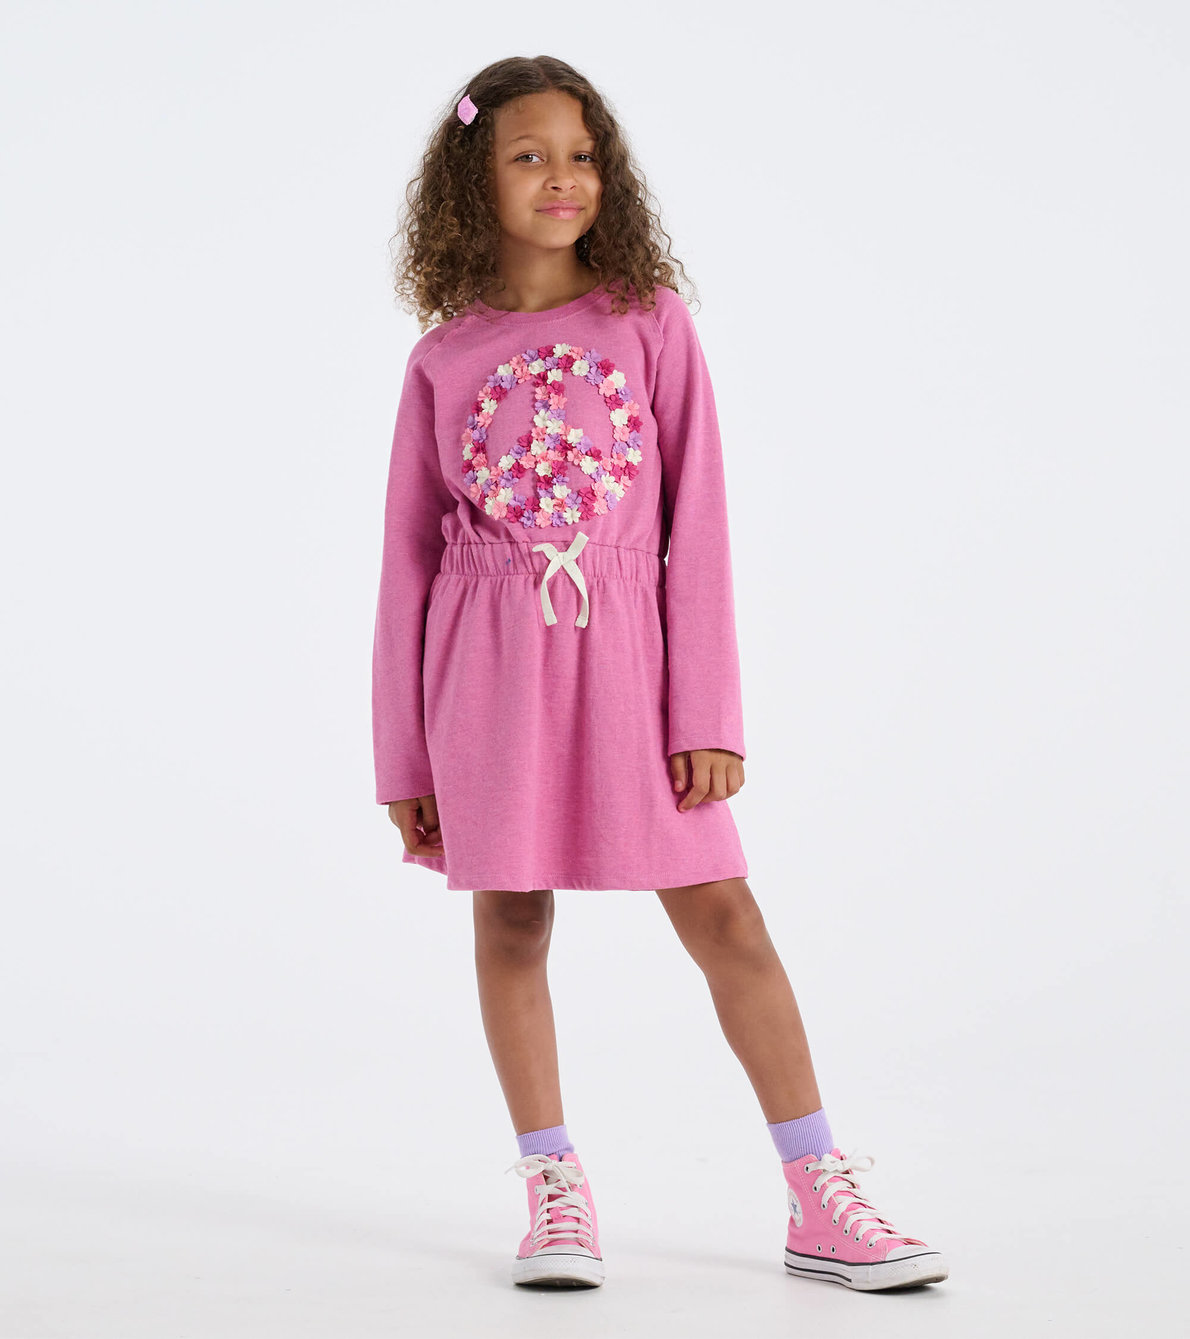 View larger image of Girls Peace Sign Waist Terry Dress